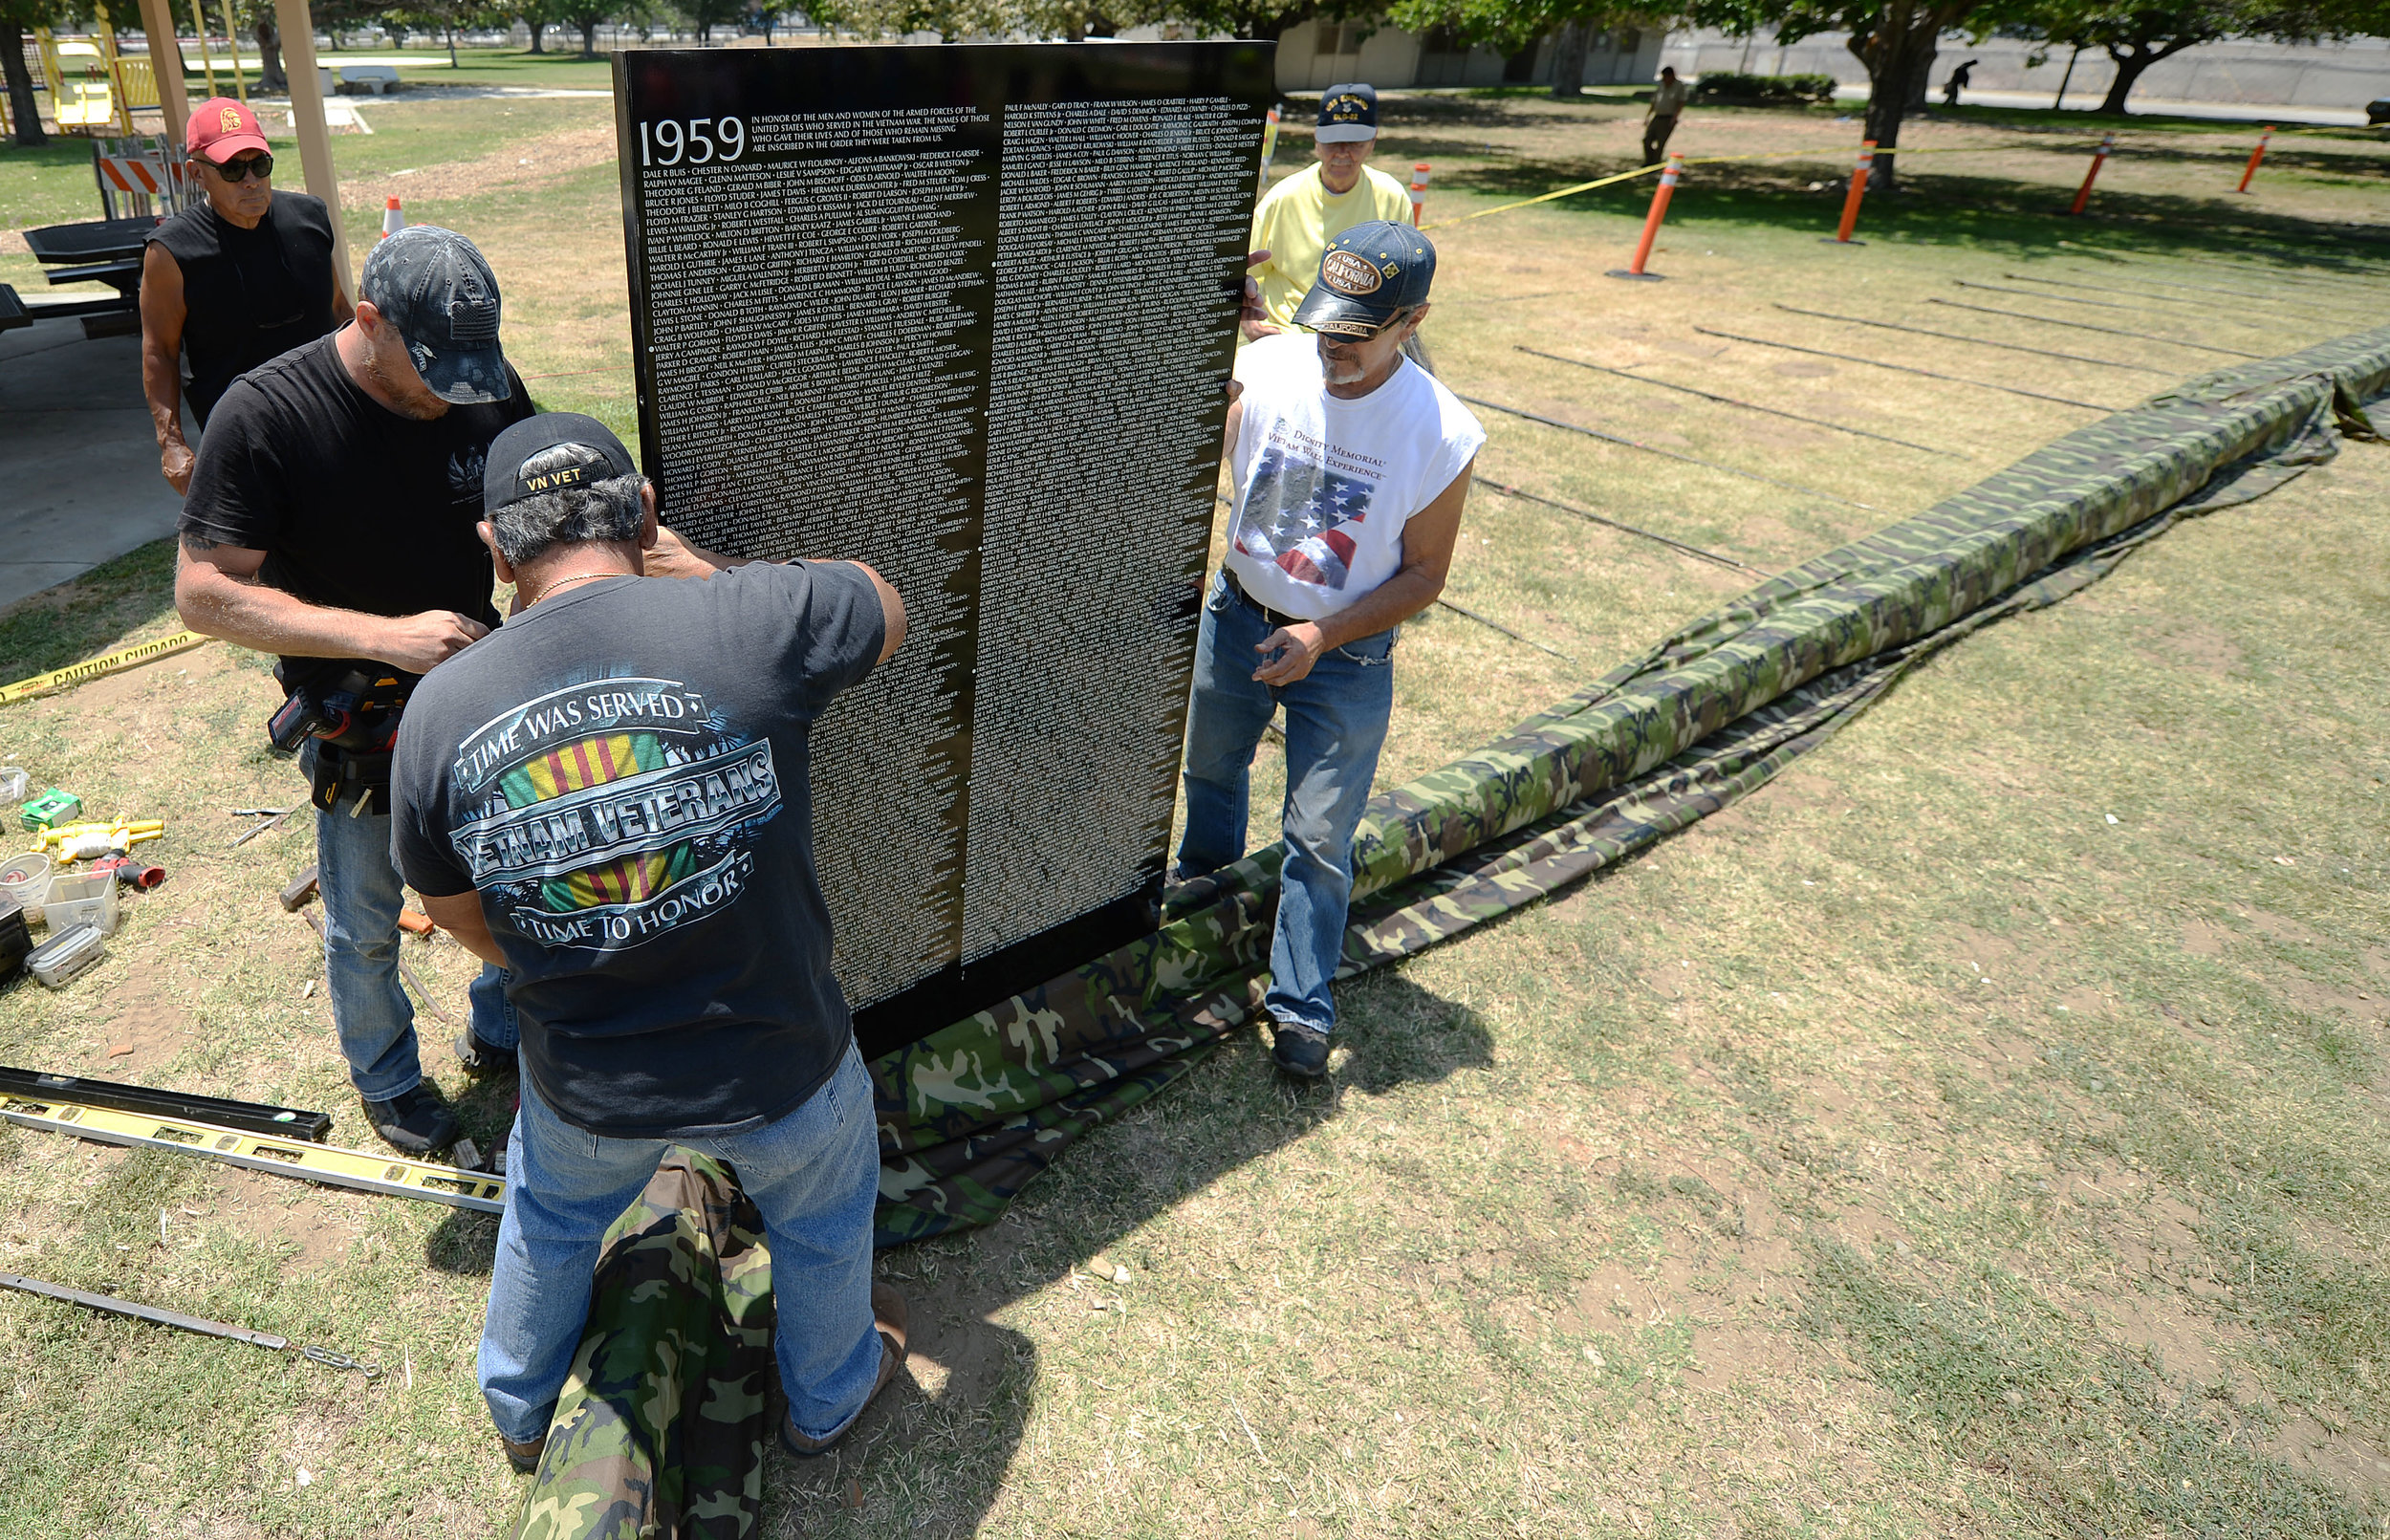  Volunteers install the first of 70 panels of the Vietnam Moving Wall Thursday at Ayala Park in Bloomington. Volunteers, many being Vietnam veterans, helped construct the Vietnam Moving Wall in Ayala Park in Bloomington Thursday June 7, 2018. The wal